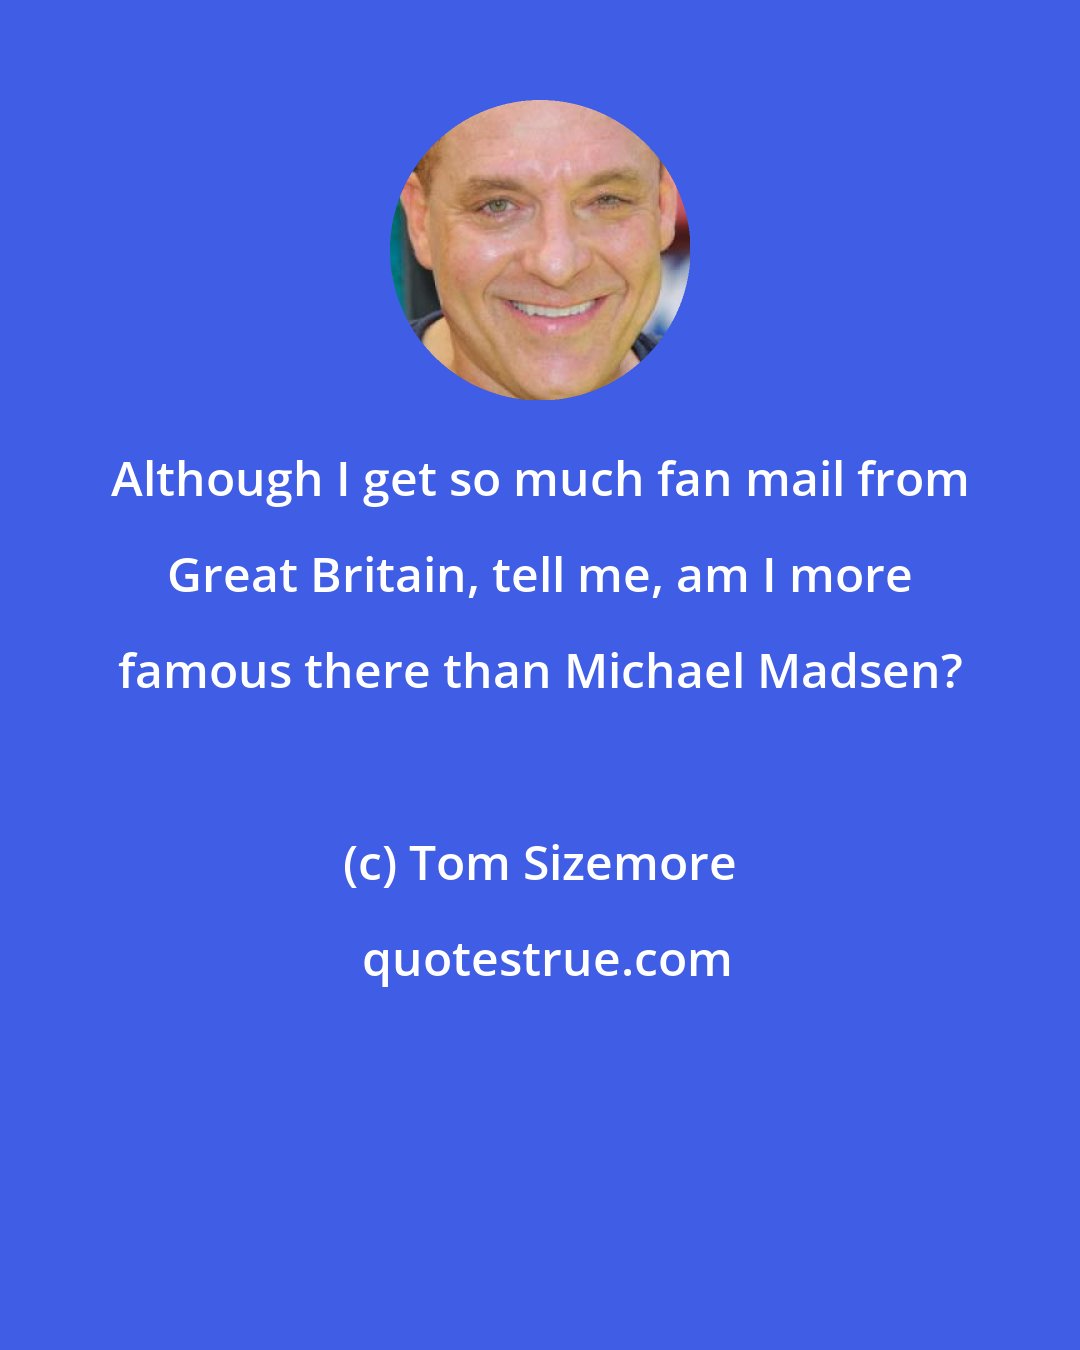 Tom Sizemore: Although I get so much fan mail from Great Britain, tell me, am I more famous there than Michael Madsen?